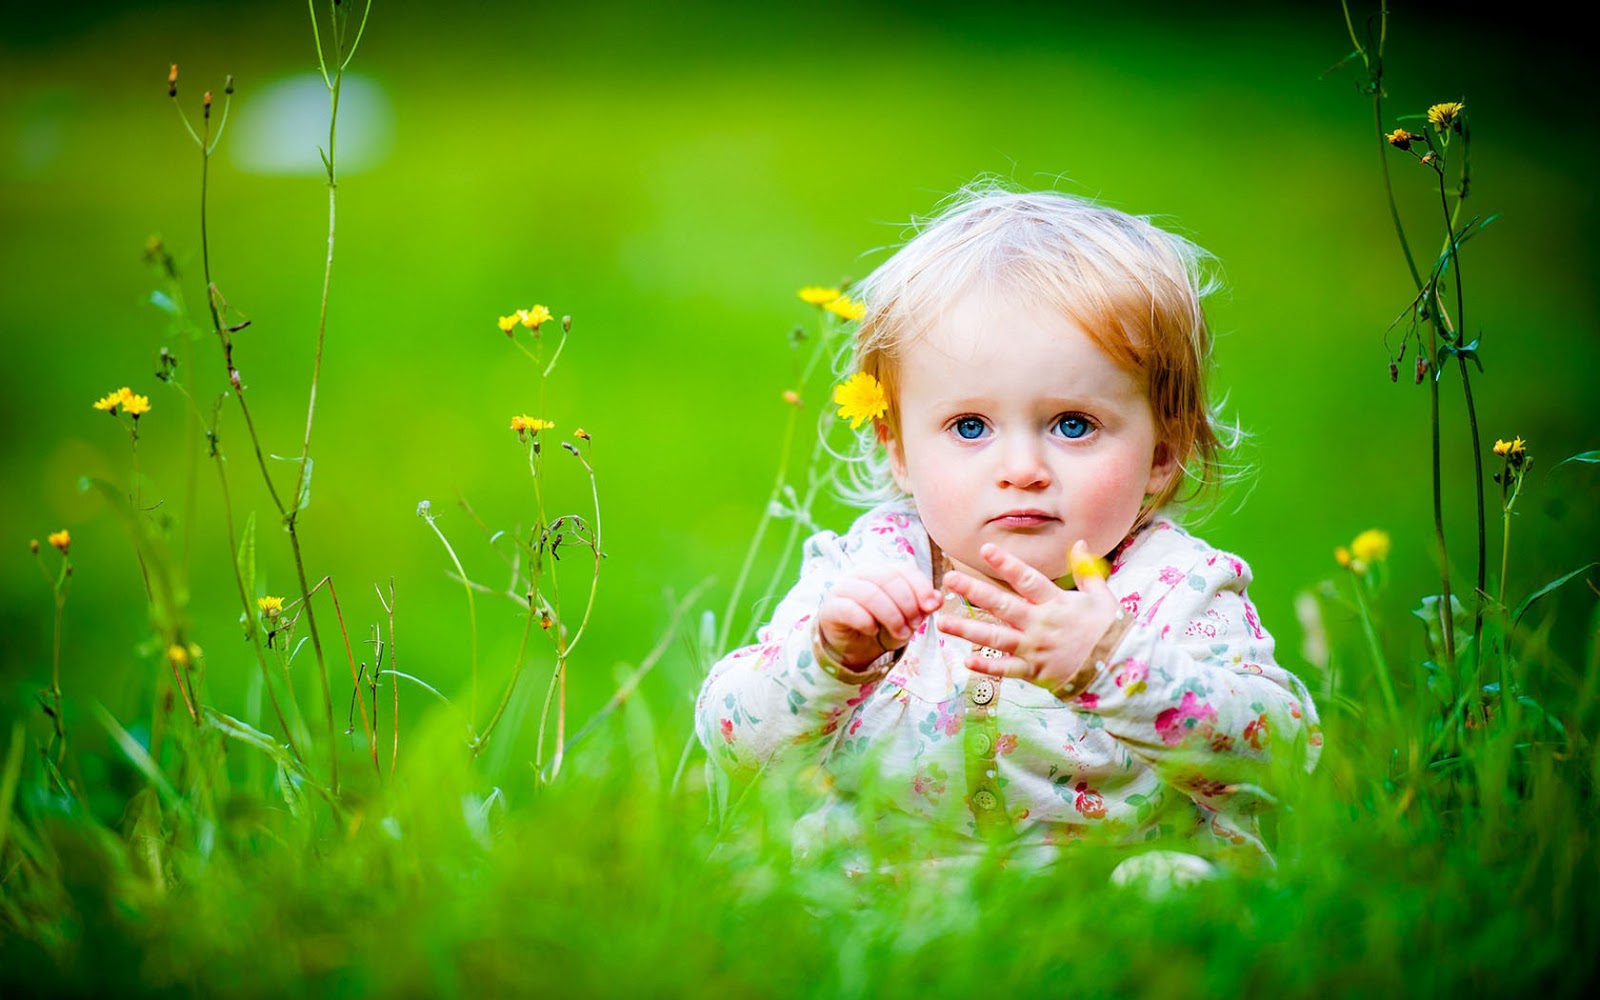 Cute Baby Laughing Wallpaper Free Cute Baby Laughing Wallpaper By ...